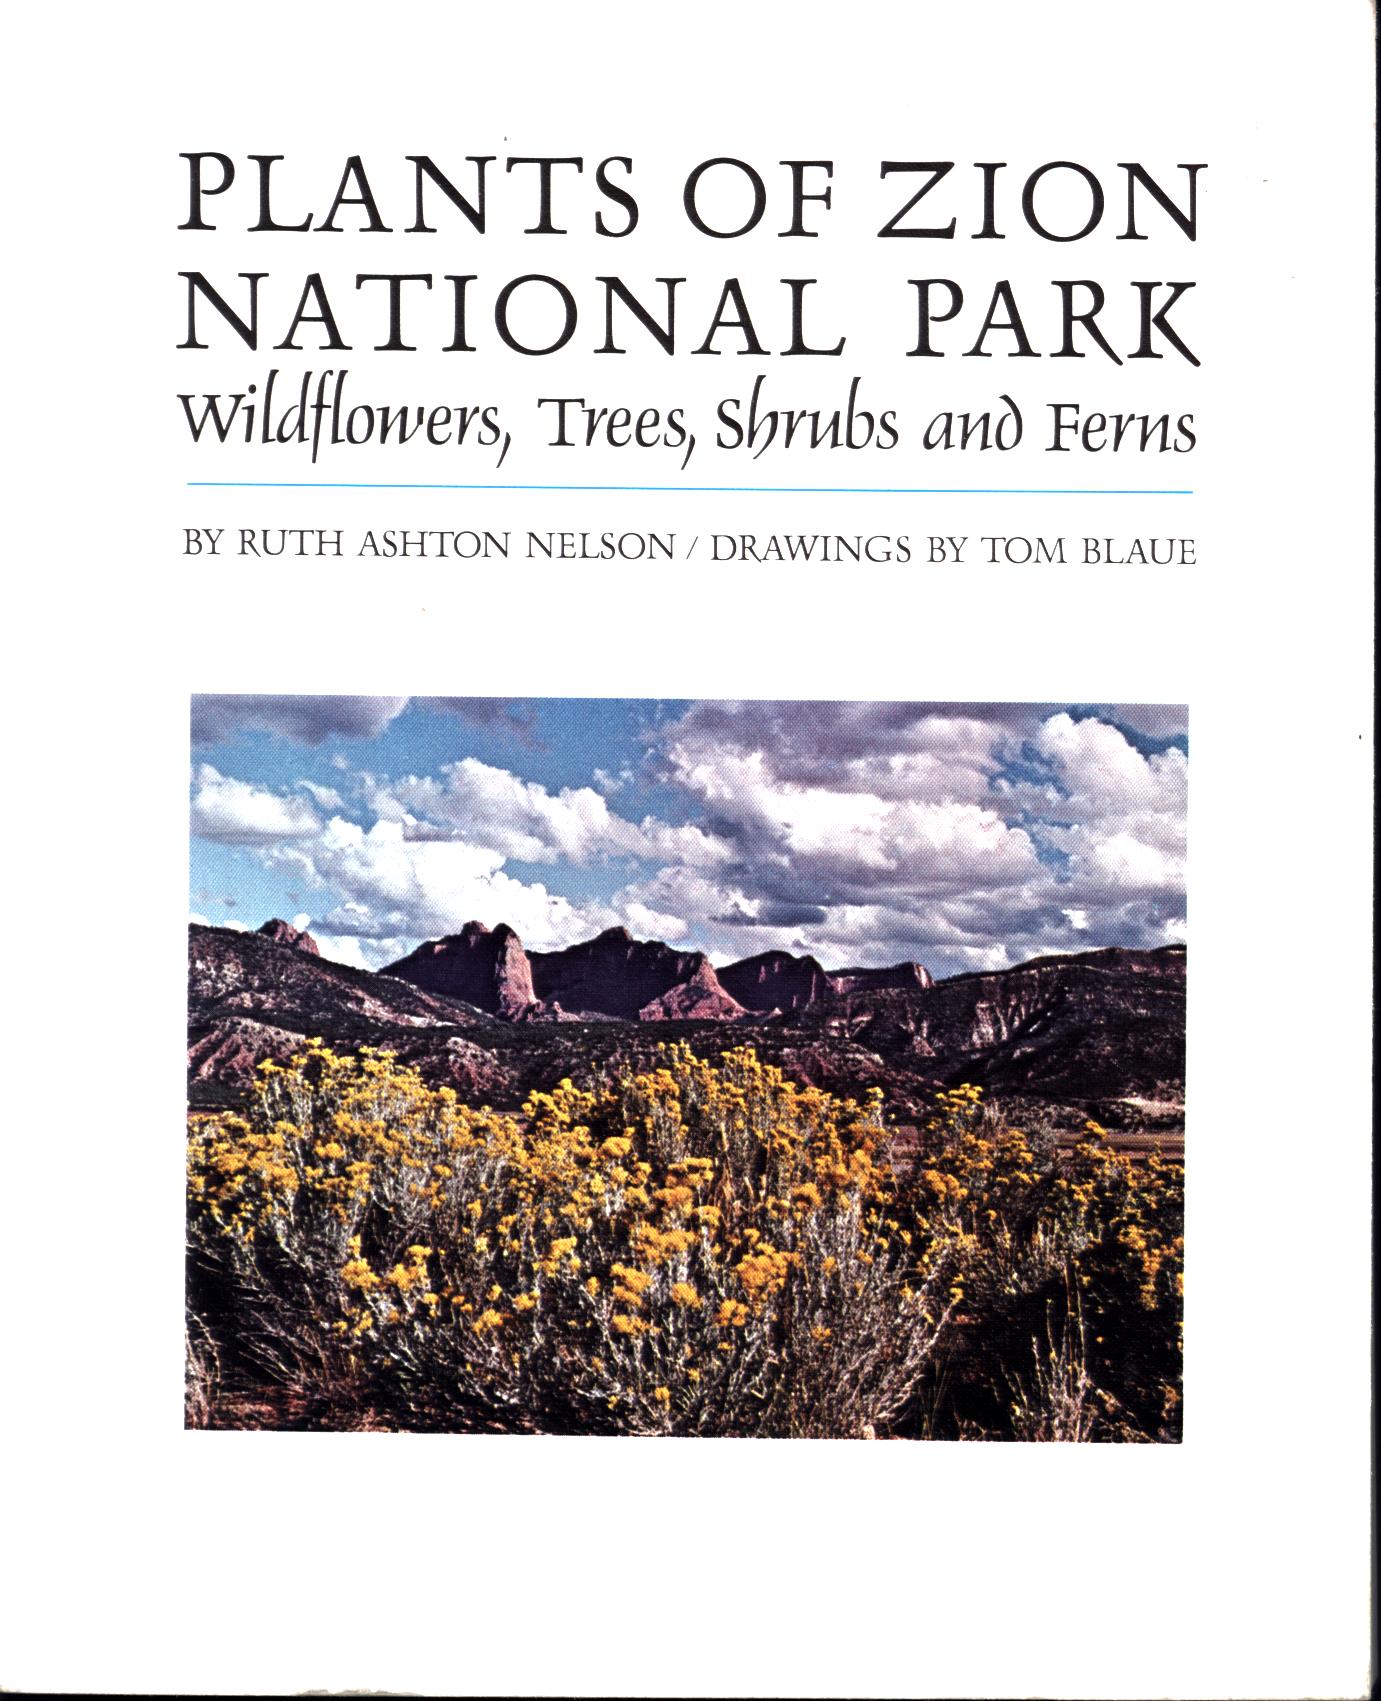 PLANTS OF ZION NATIONAL PARK: wildflowers, trees, shrubs, and ferns. by Ruth Ashton Nelson.